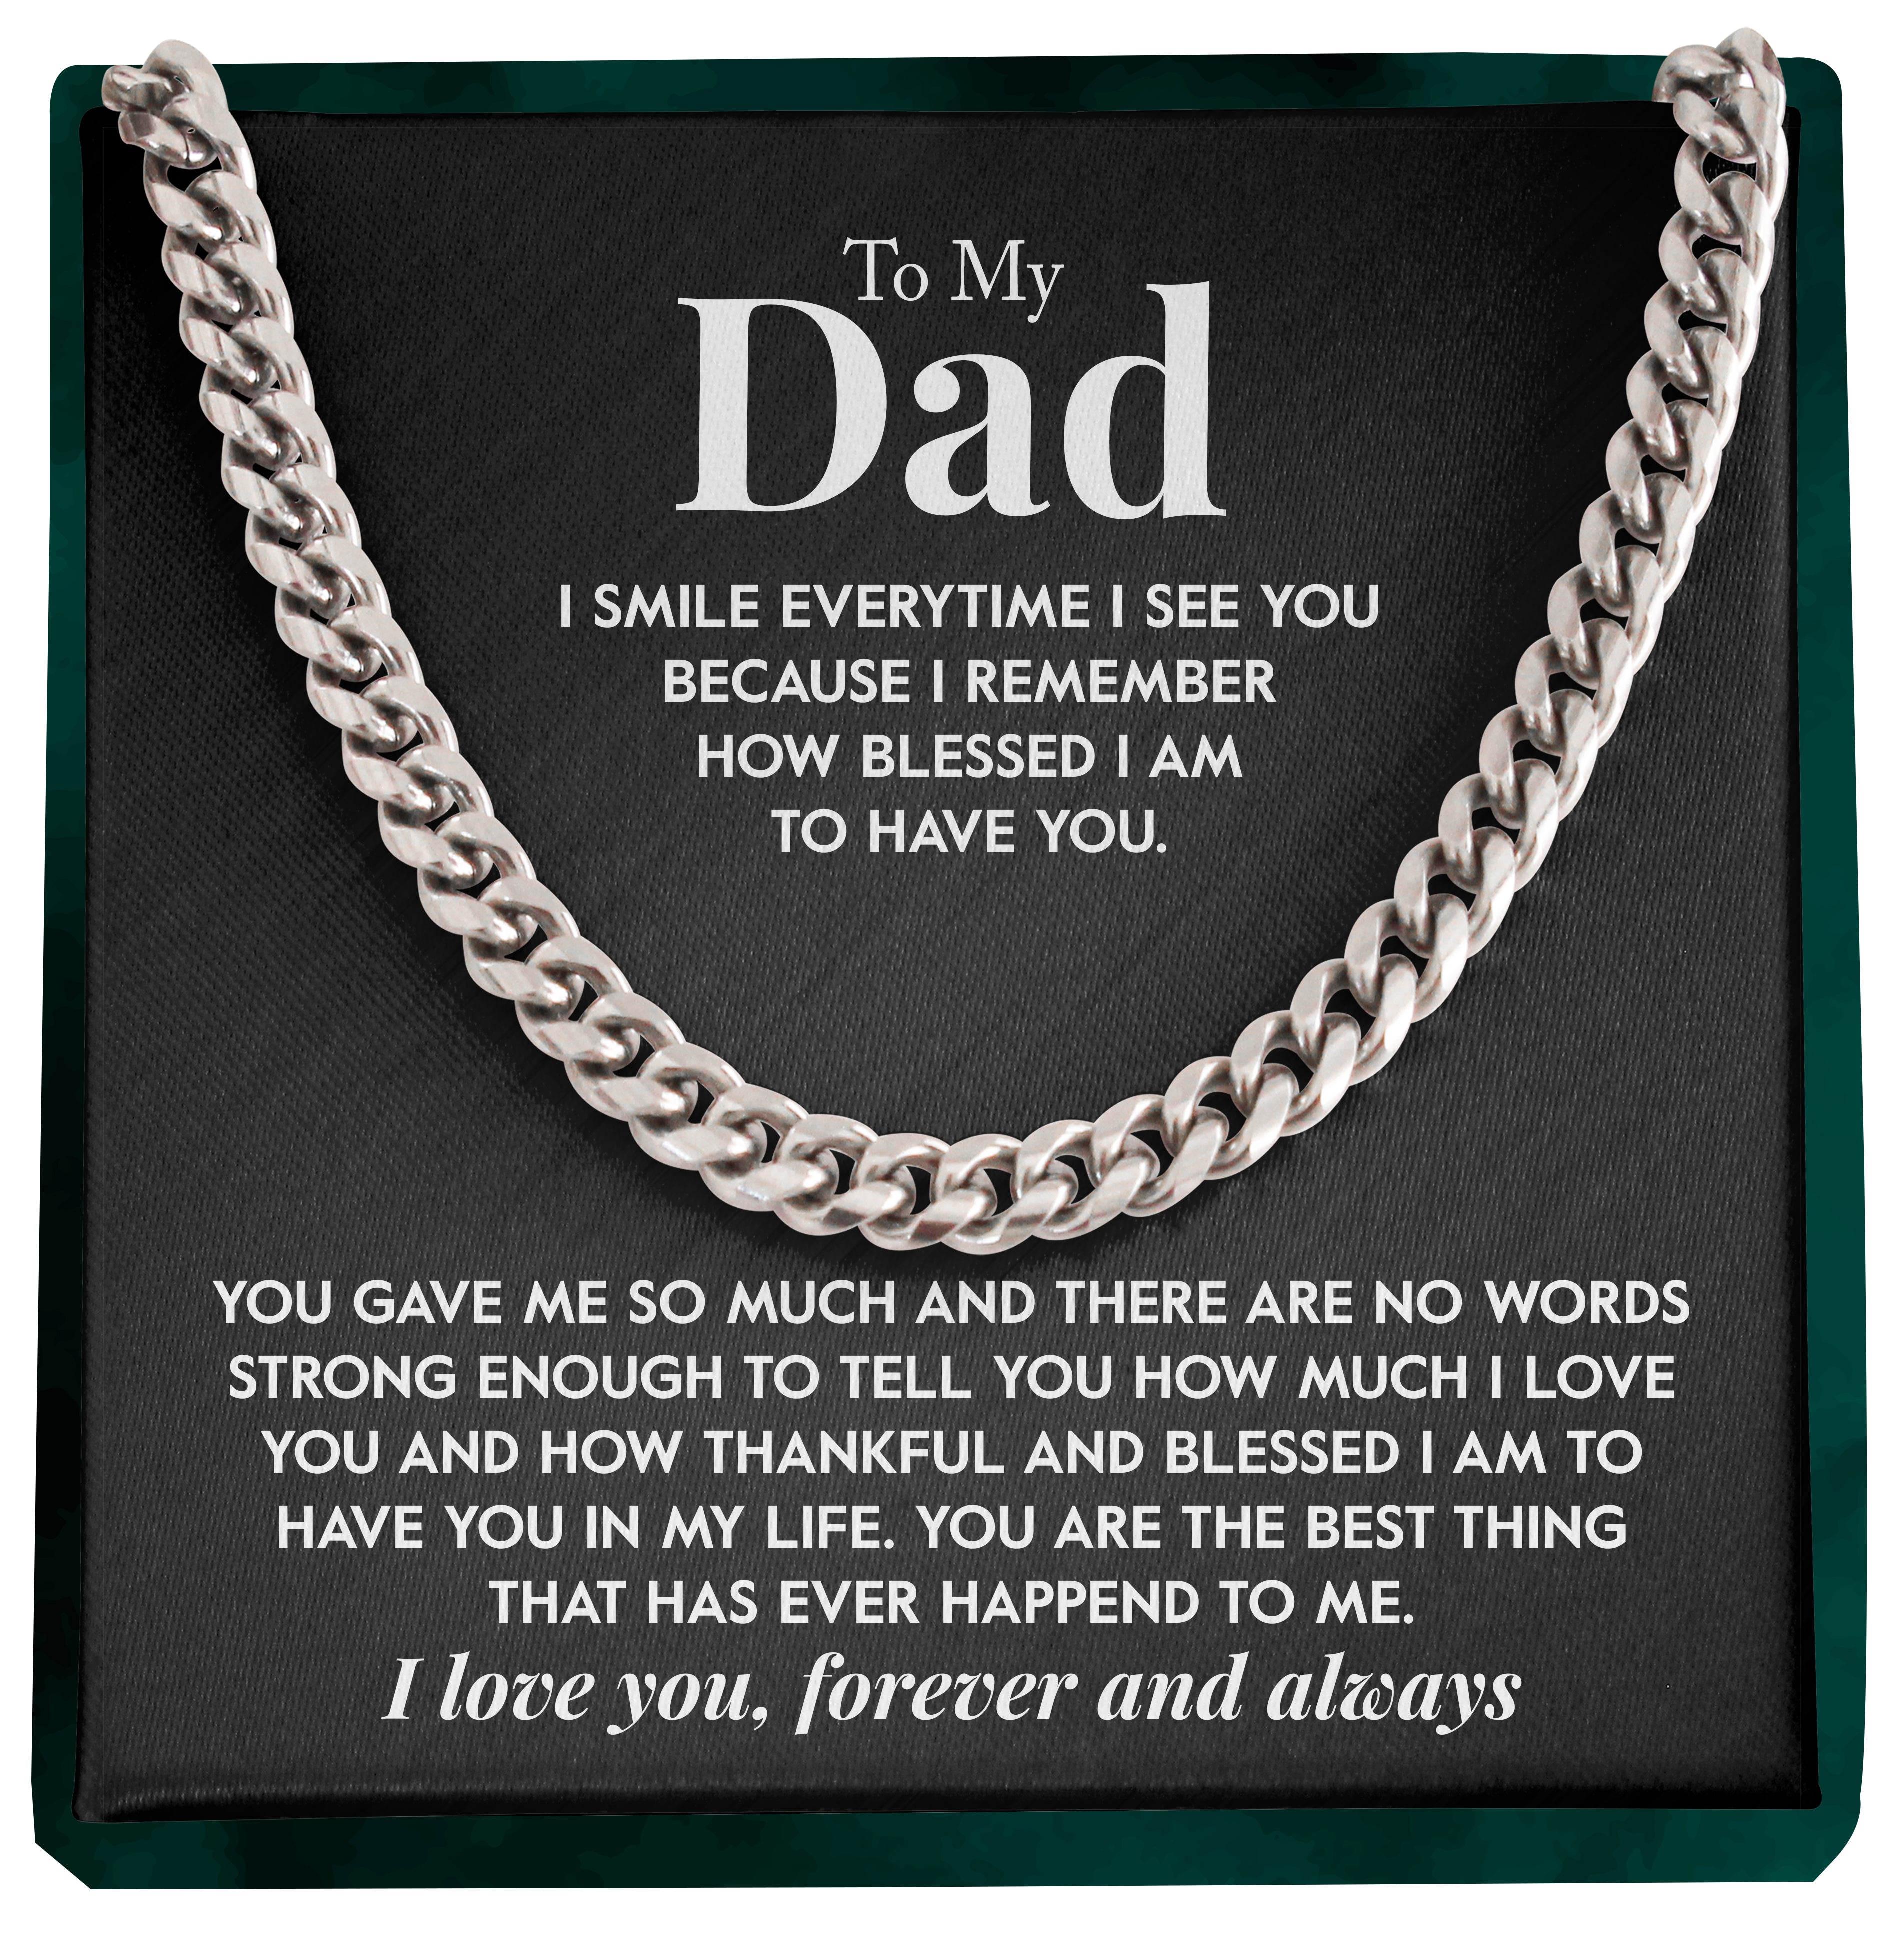 To My Dad | "No Words" | Cuban Chain Link